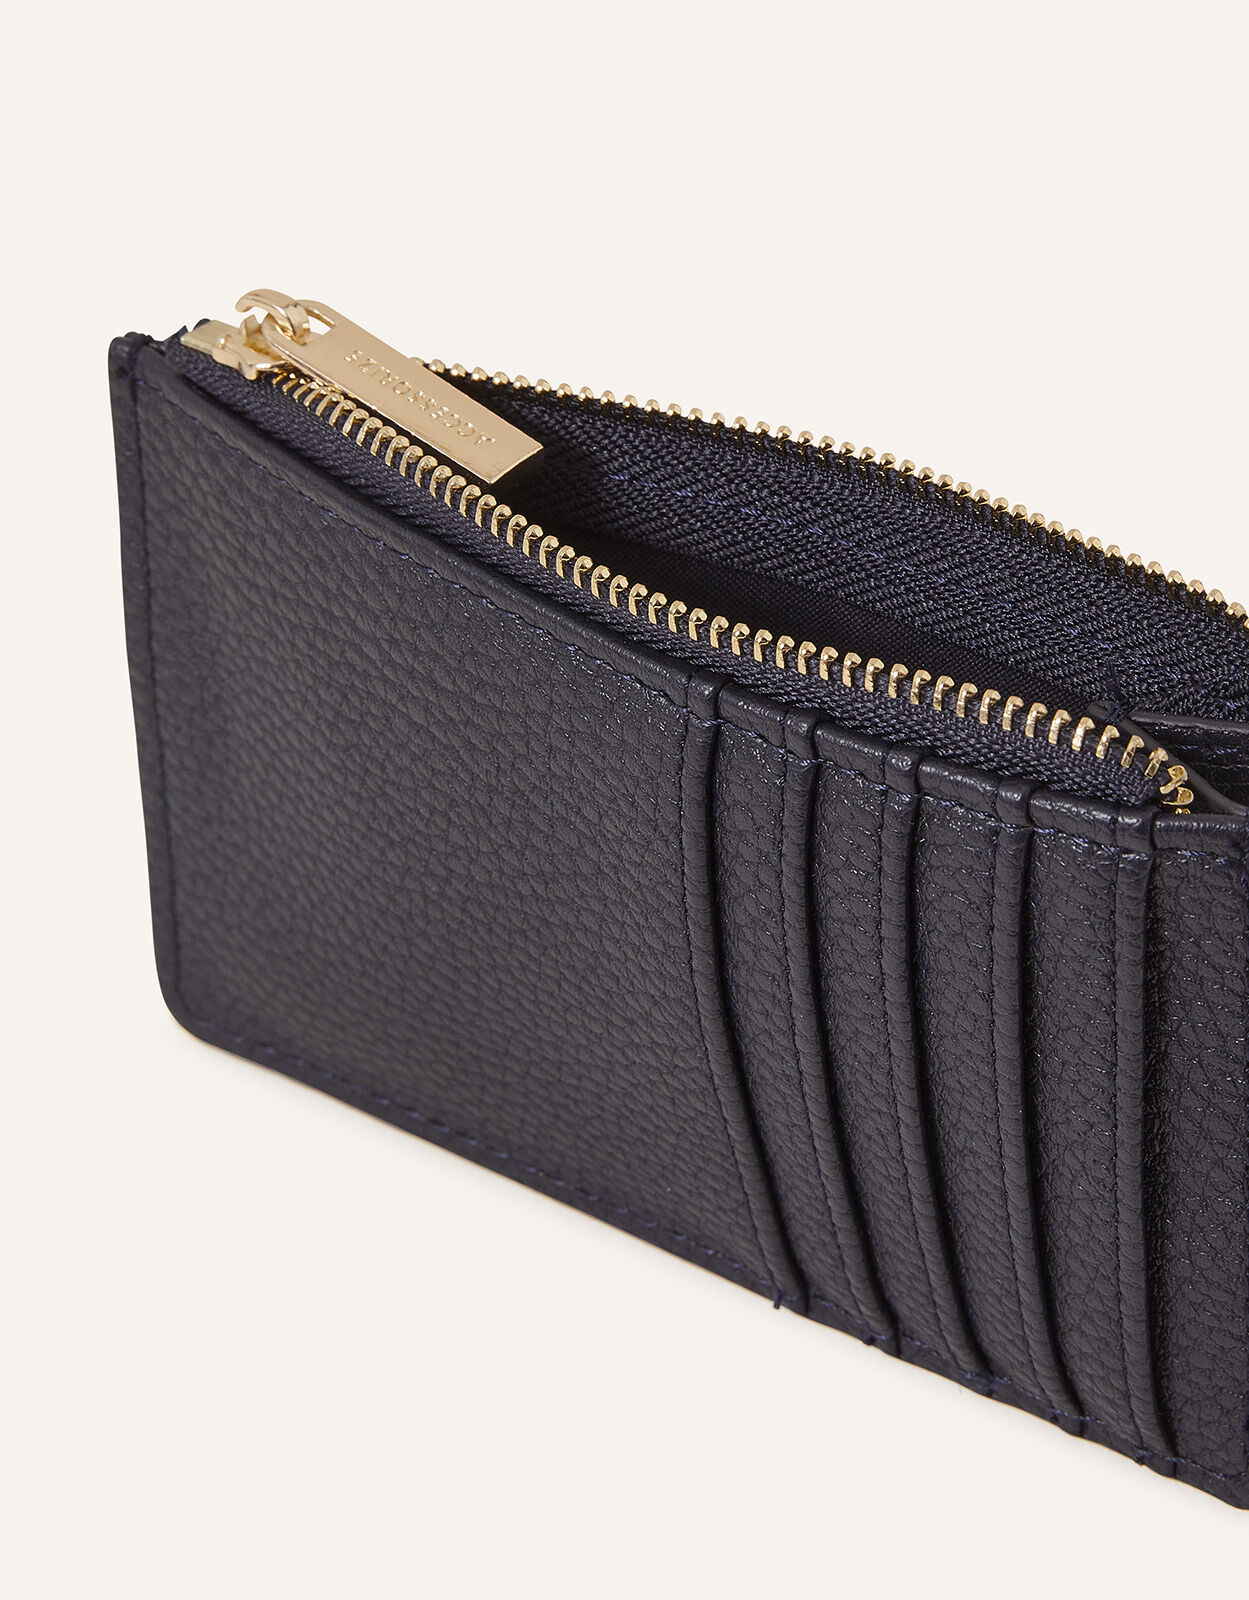 Balmain Zipped Quilted Leather Card Holder - Farfetch